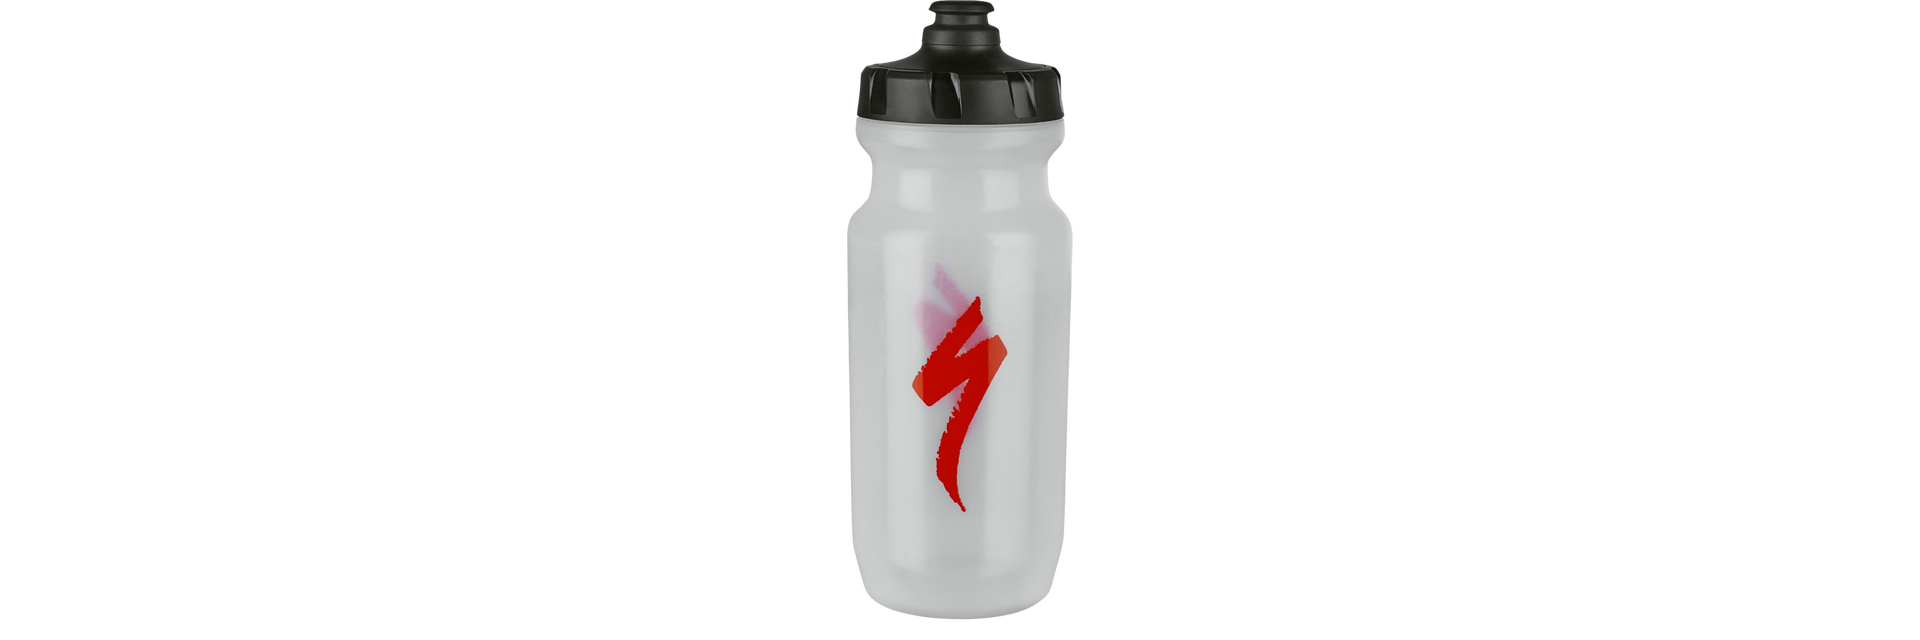 Specialized Little Big Mouth Water Bottle 21oz Translucent